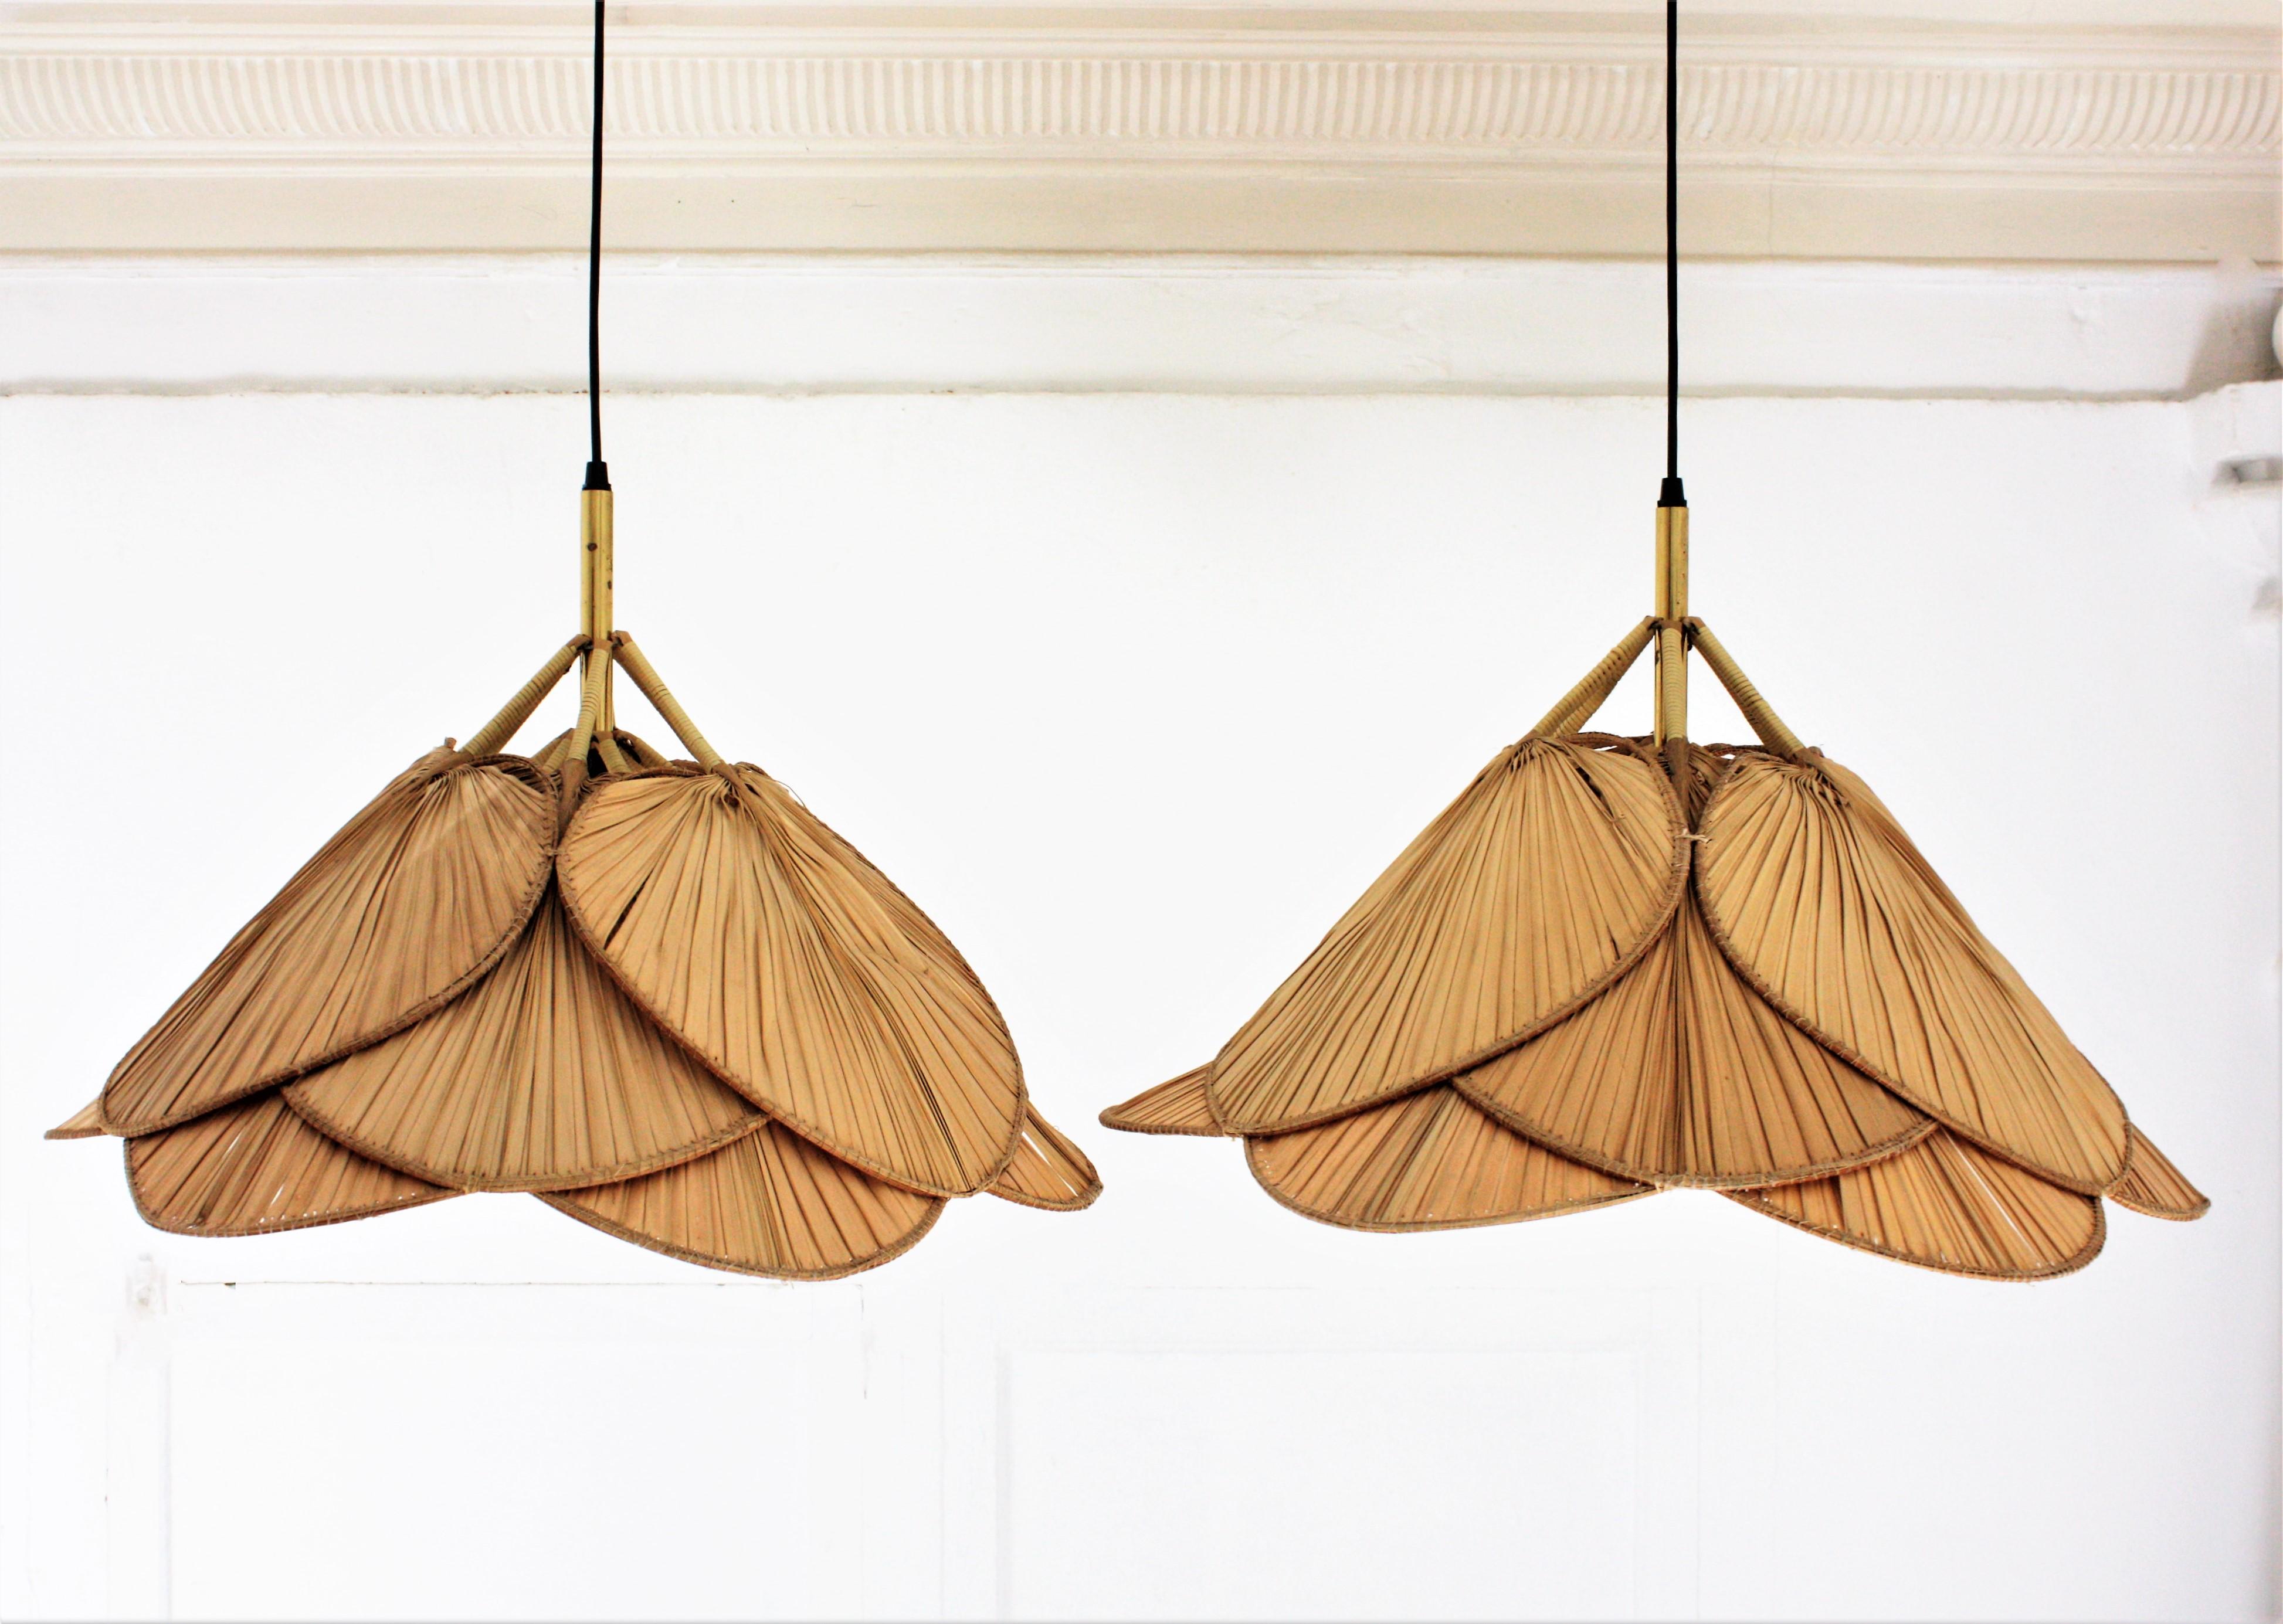 Pair of iconic palm leaf 'uchiwa' suspension lamps by Ingo Maurer, Germany, 1970s.
12 'Uchiwa' leaves fans each lamp.
These iconic pendants consist of twelve fans made of natural palm leaf. Uchiwa leaves fans are positioned as a flower around a